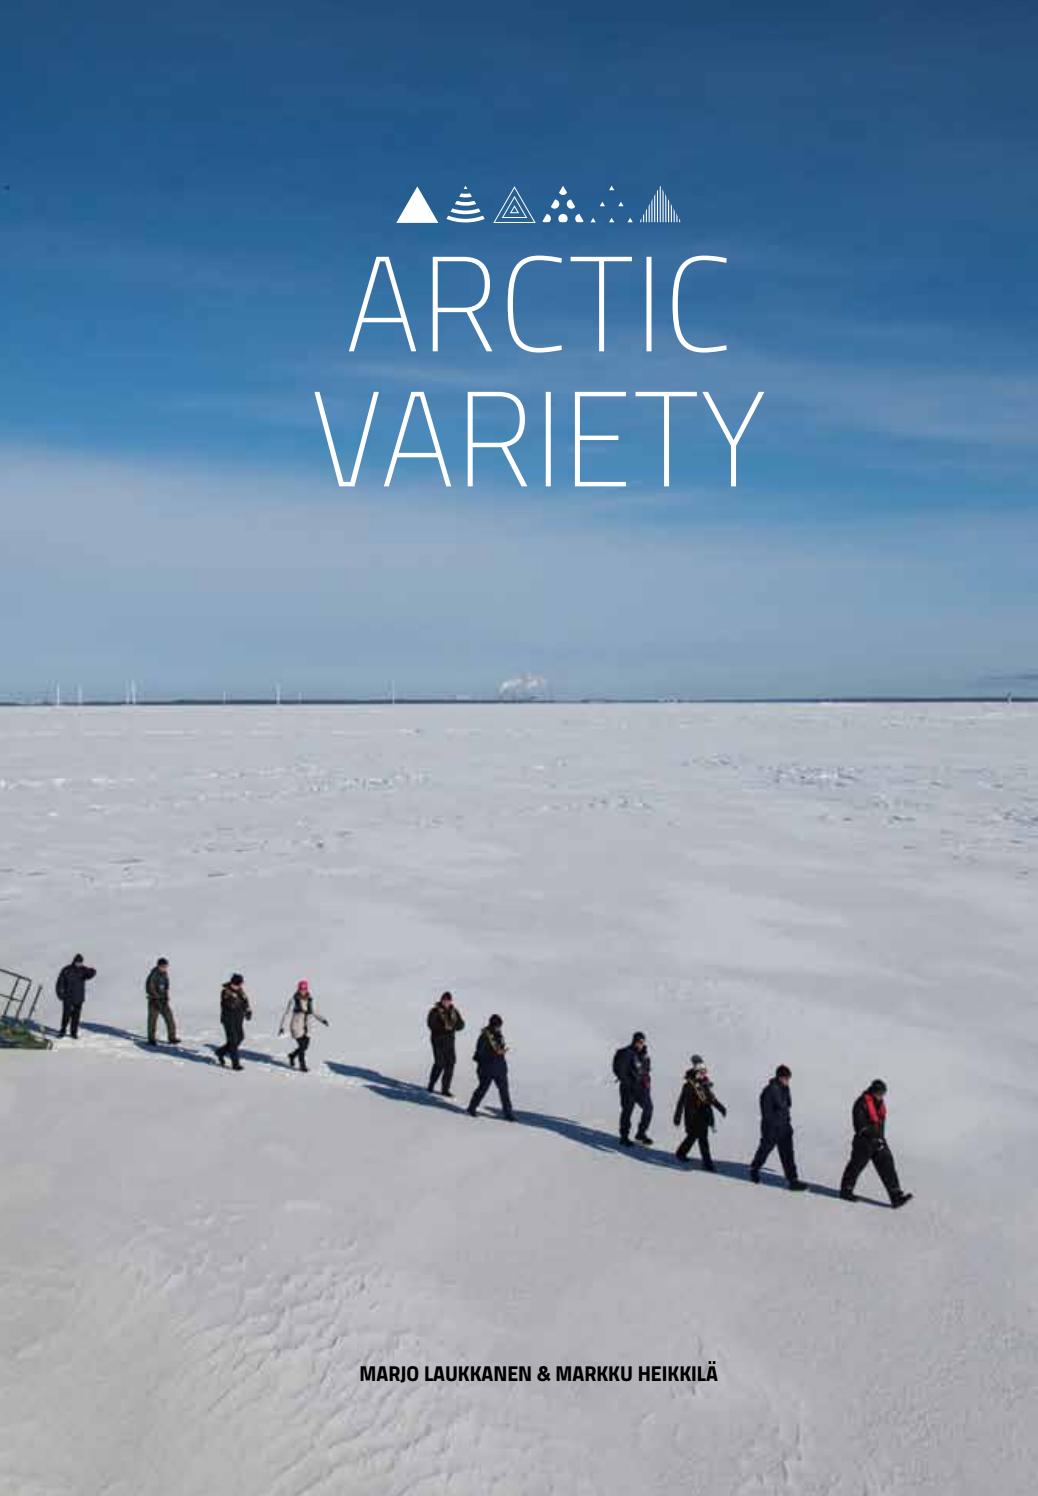 Book Cover of "Arctic Variety"